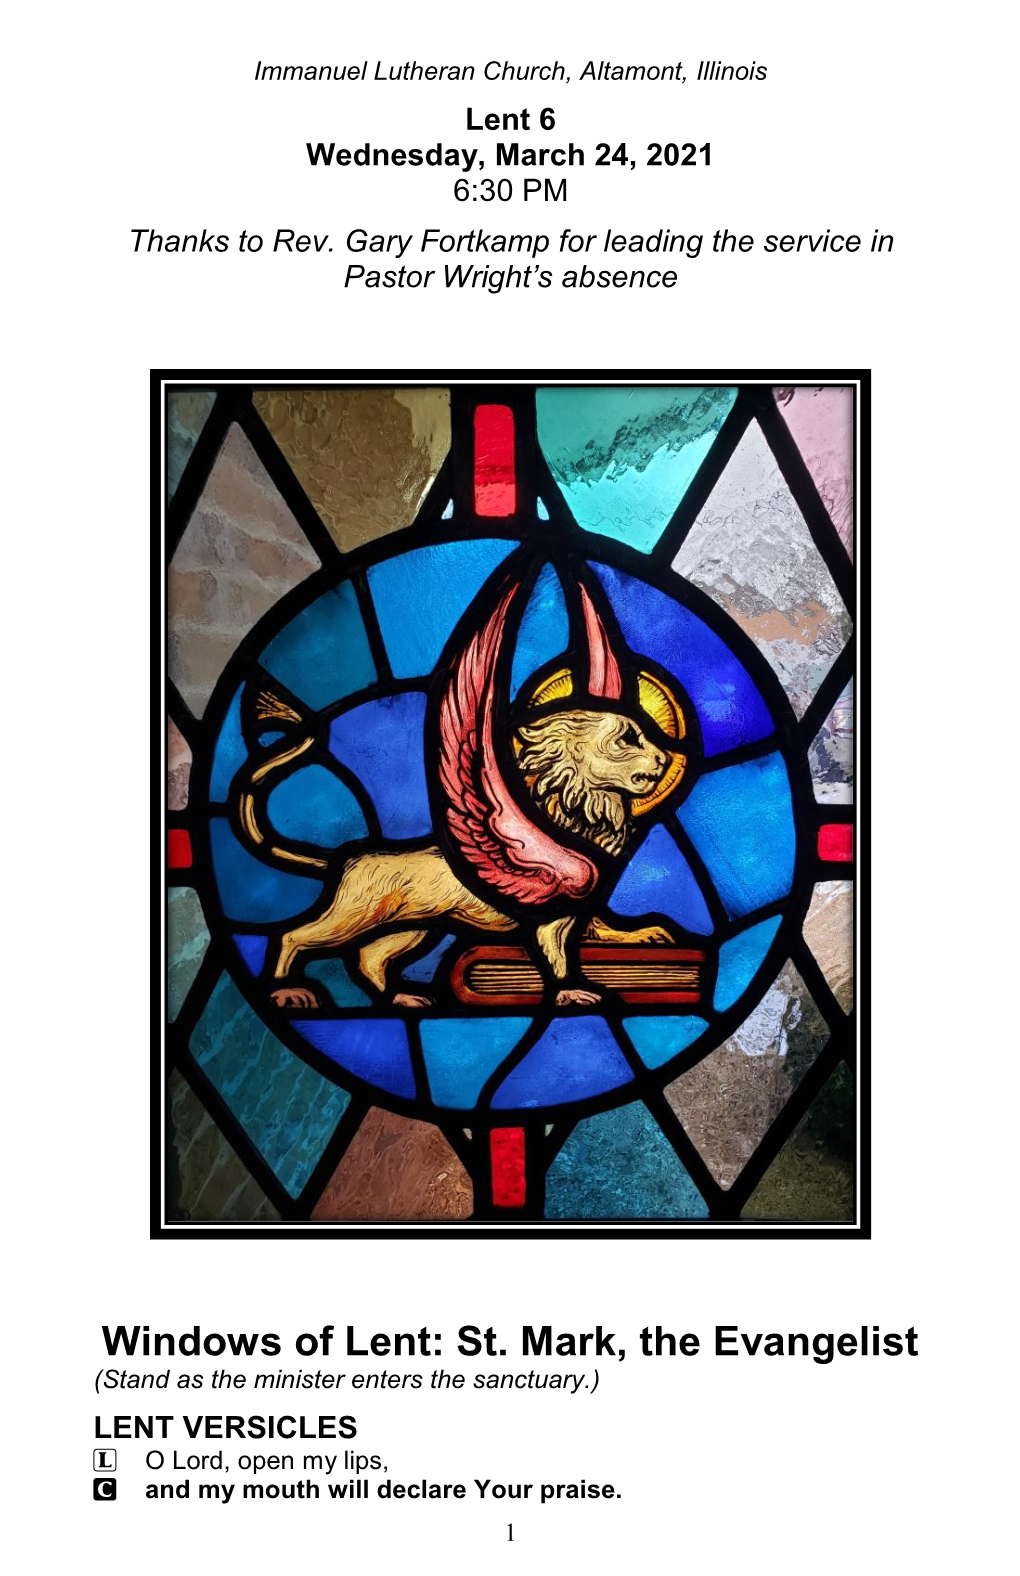 Windows of Lent: St. Mark, the Evangelist (Stand As the Minister Enters the Sanctuary.) LENT VERSICLES L O Lord, Open My Lips, C and My Mouth Will Declare Your Praise